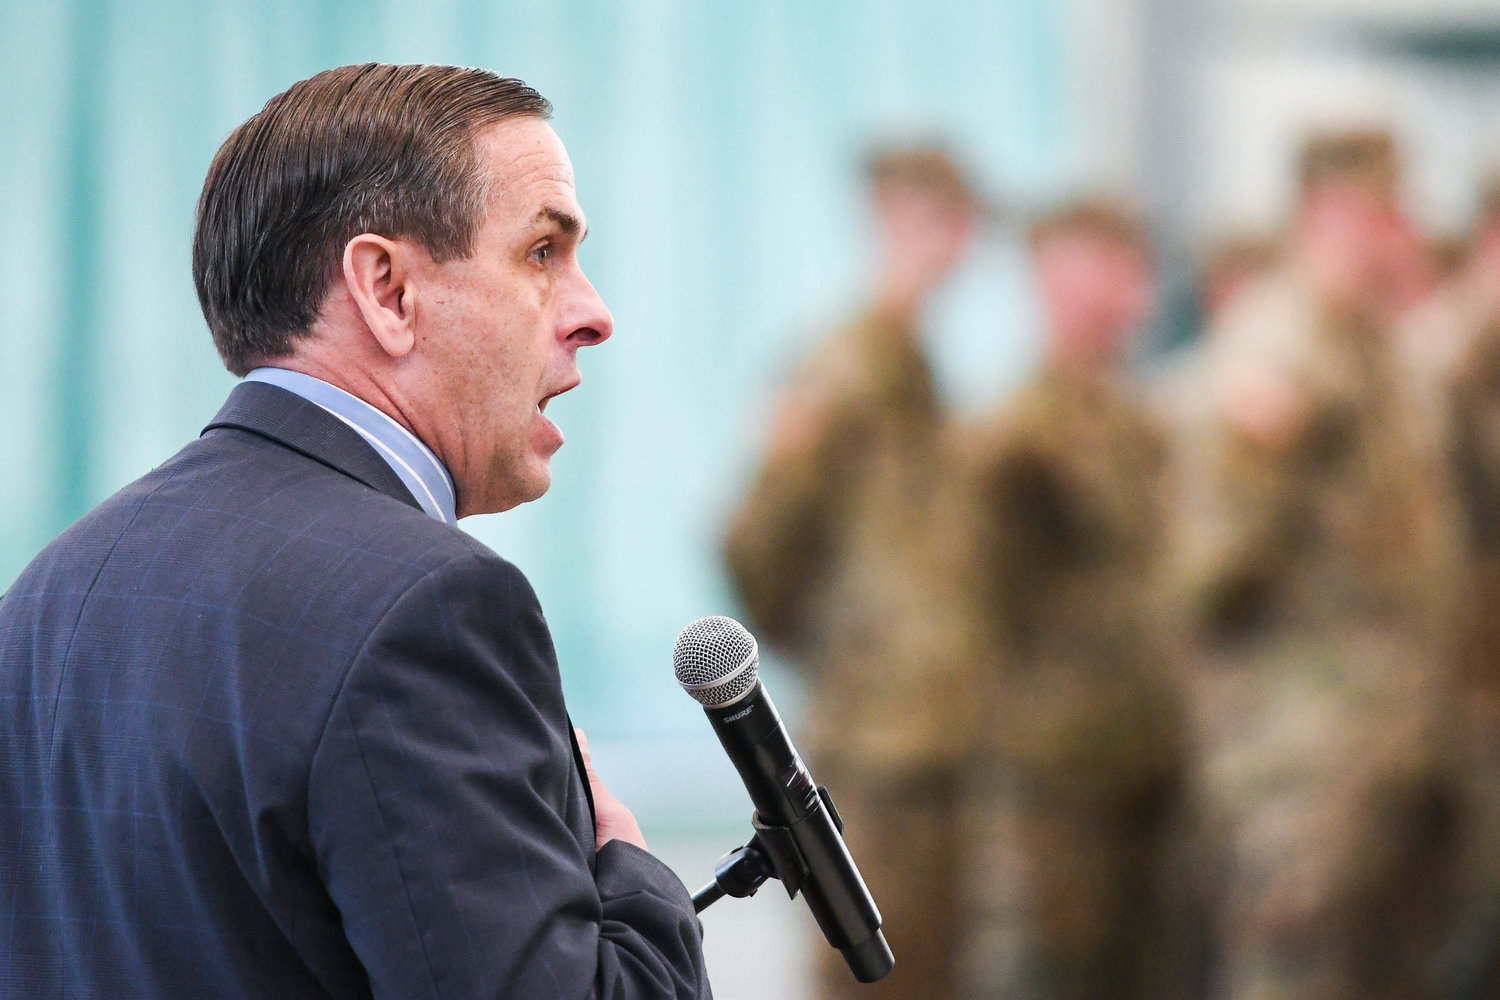 Assemblyman Robert Smullen speaks during a farewell ceremony for soldiers of the 2nd Battalion, 108th Infantry of the New York Army National Guard on Tuesday morning at Mohawk Valley Community College in Utica.